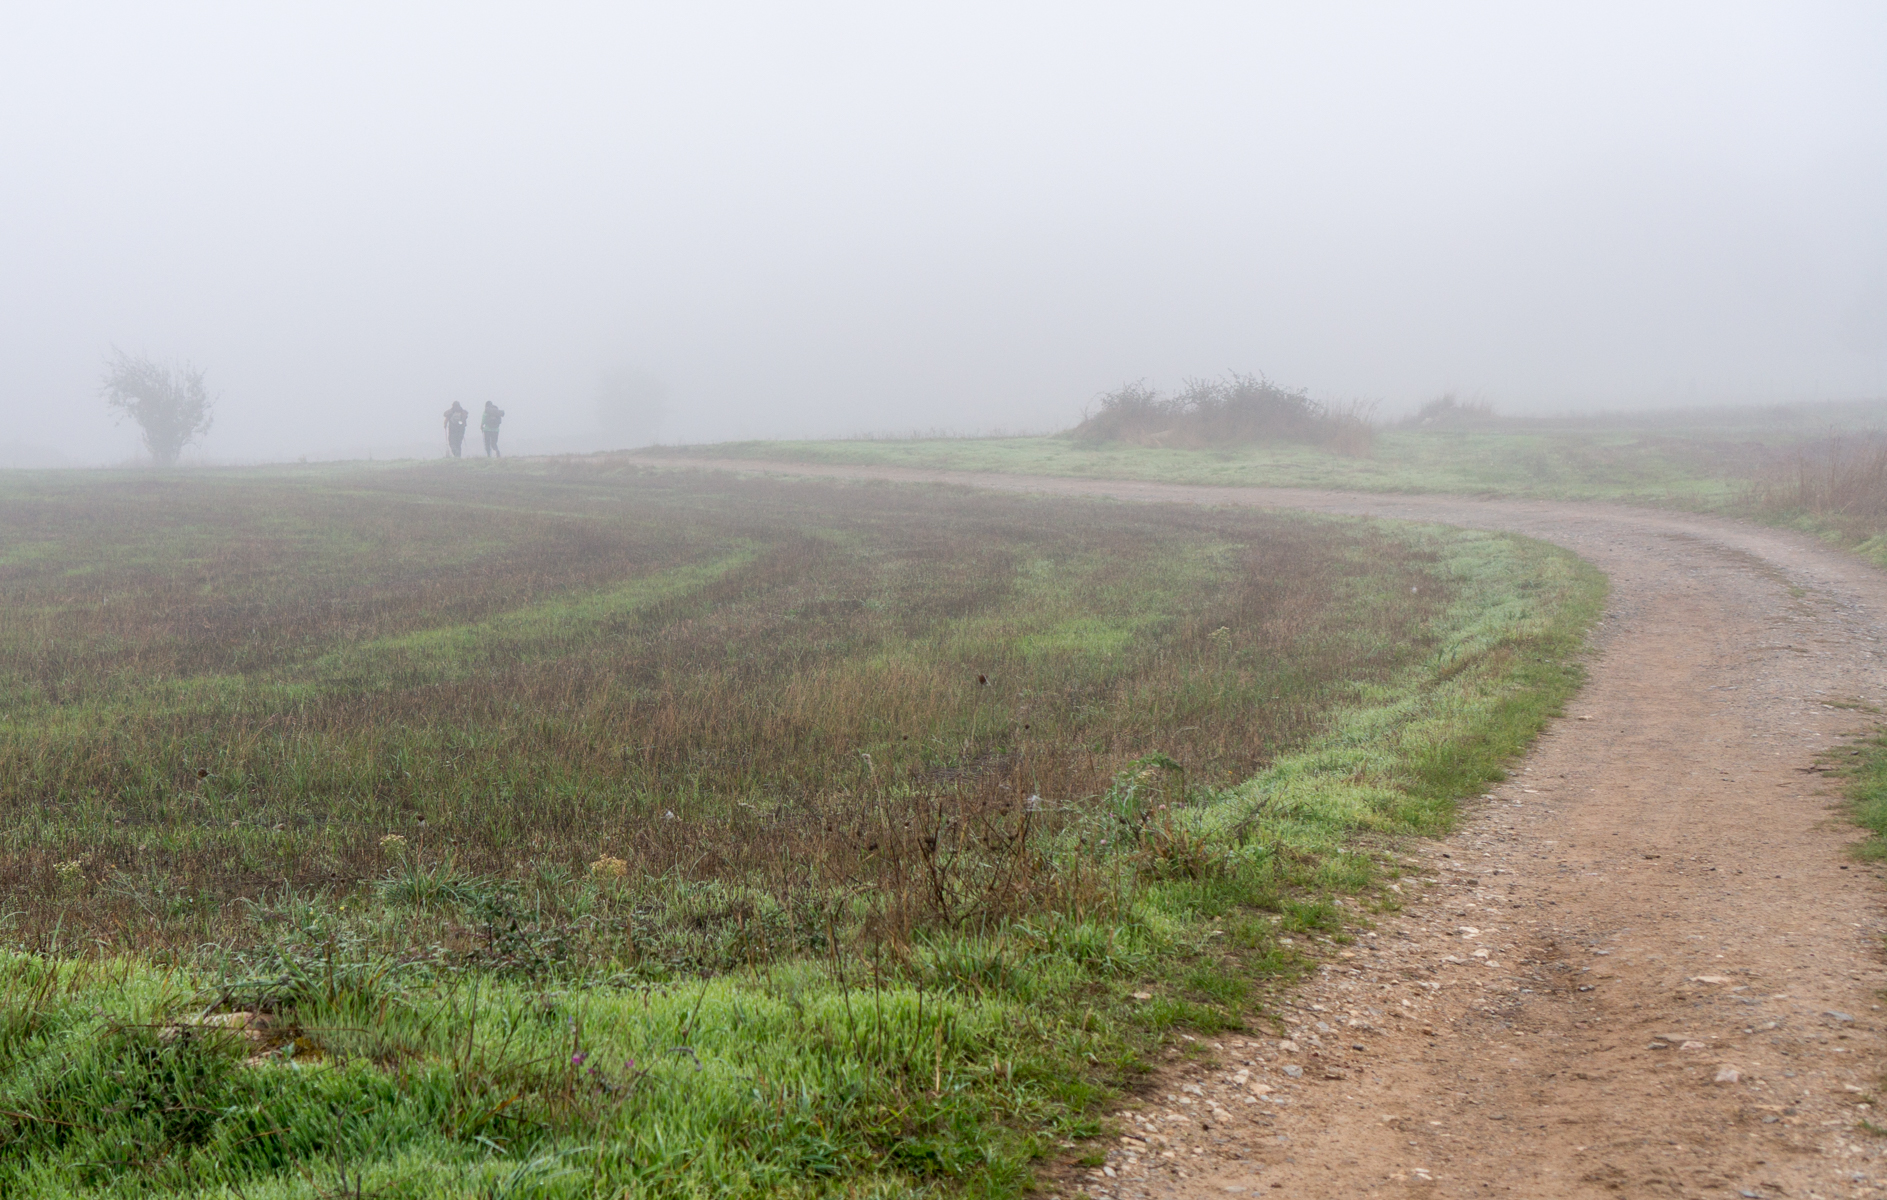 Two pilgrims on a foggy section of the Camino Francés as it passes between harvested agricultural fields west of Sarria, Spain | Photo by Mike Hudak